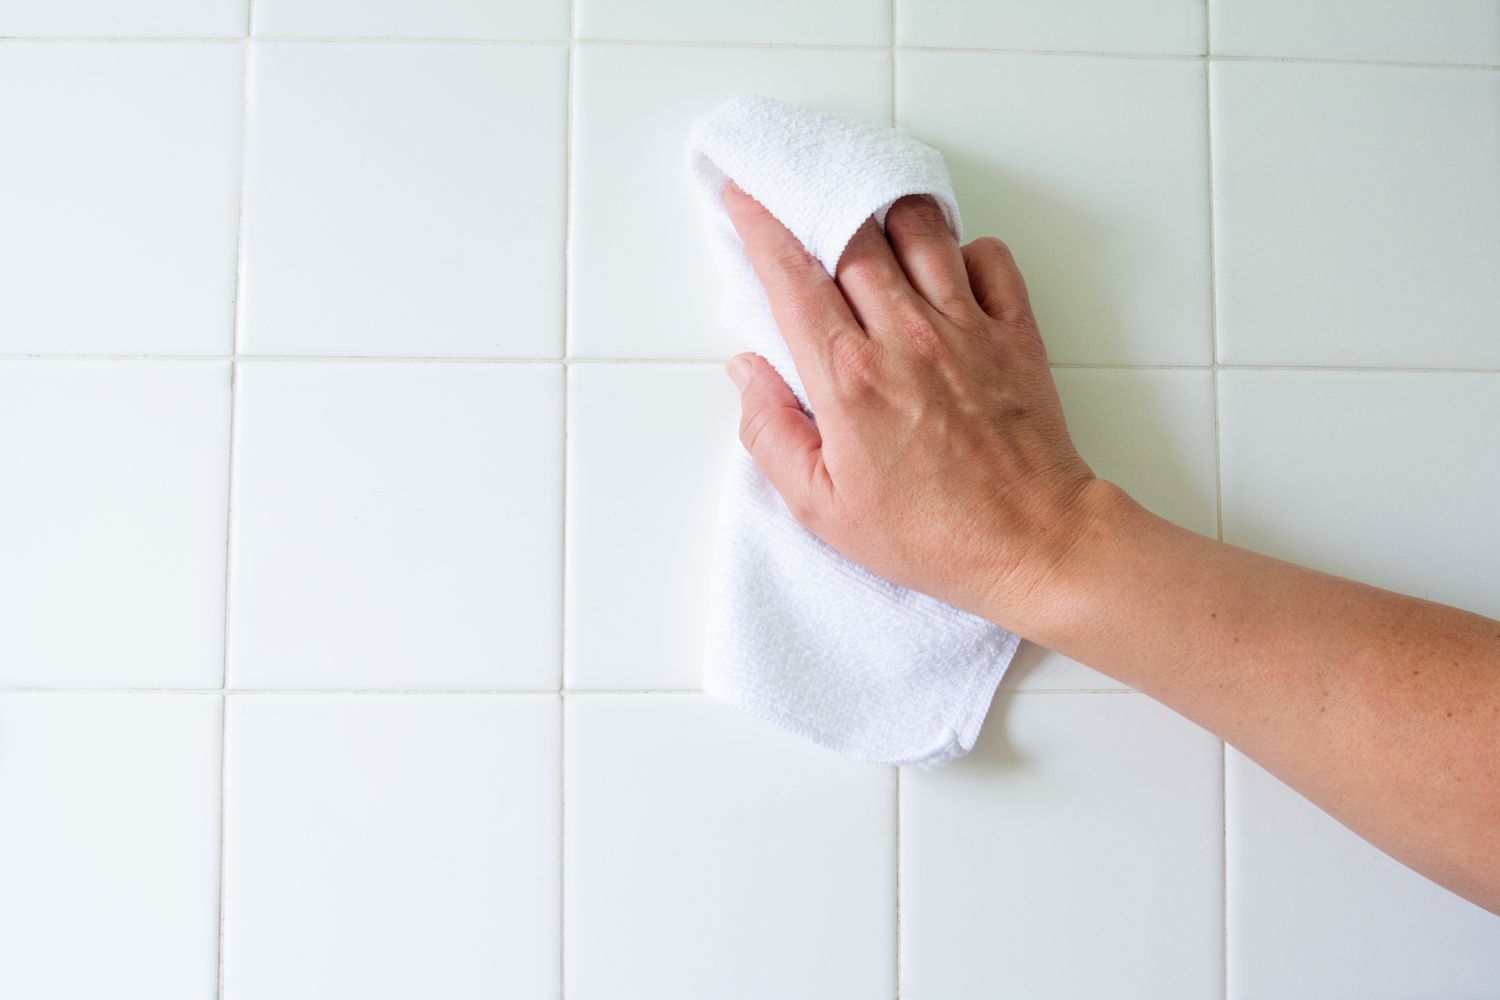 Dry the tiled area with an old towel